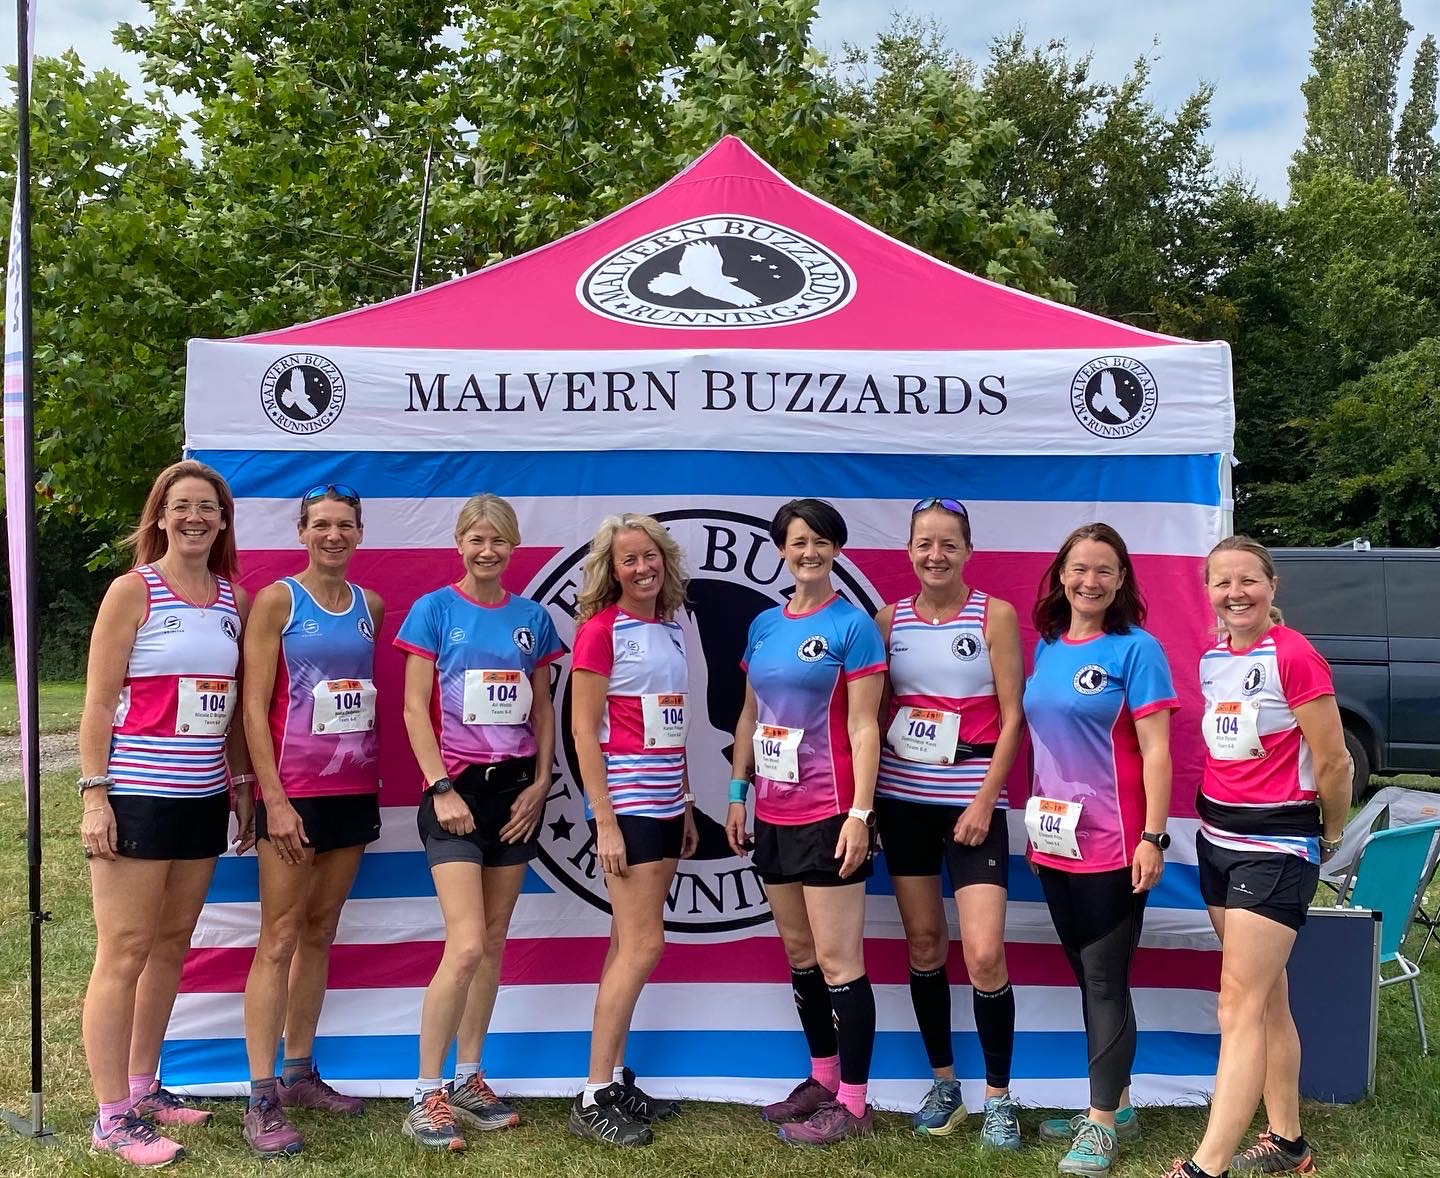 Malvern buzzards running club takes part in 24 & 12 hour Joust event - 4th & 5th of September 2021